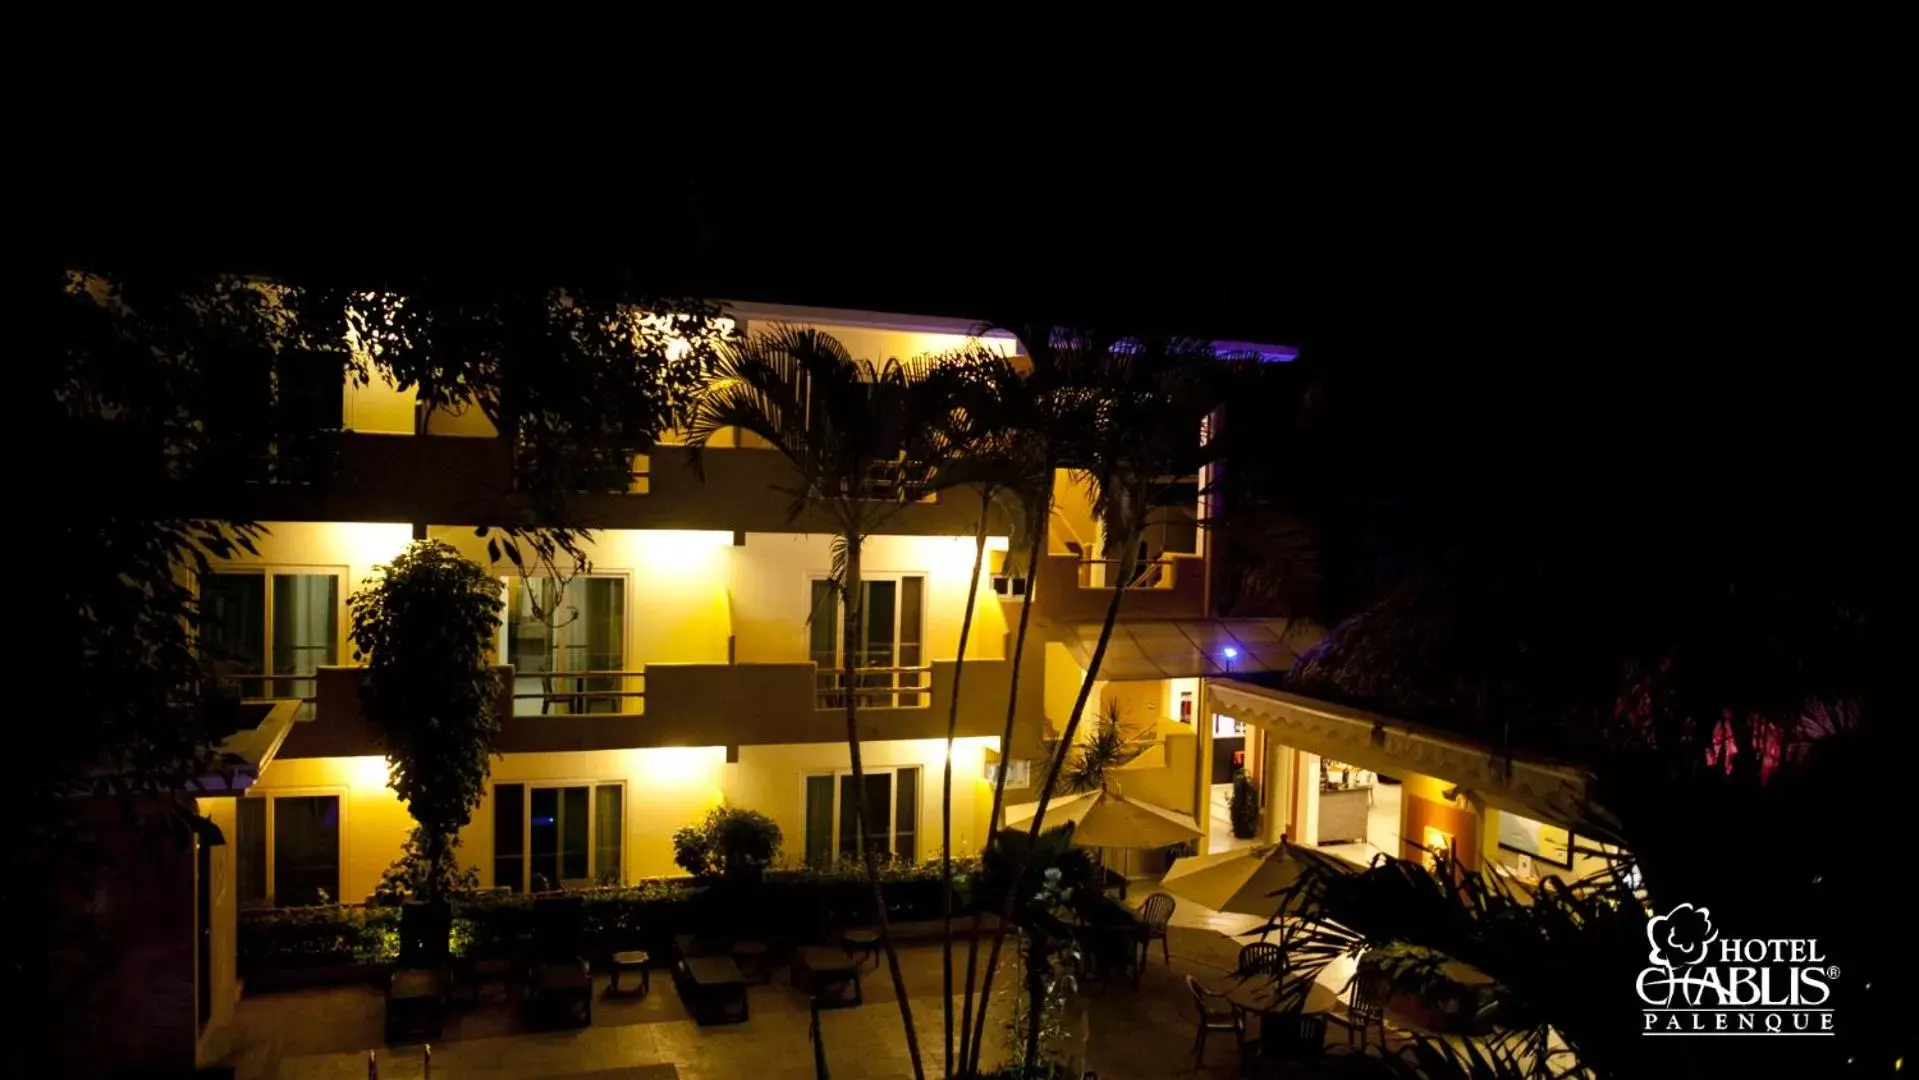 Property Building in Hotel Chablis Palenque